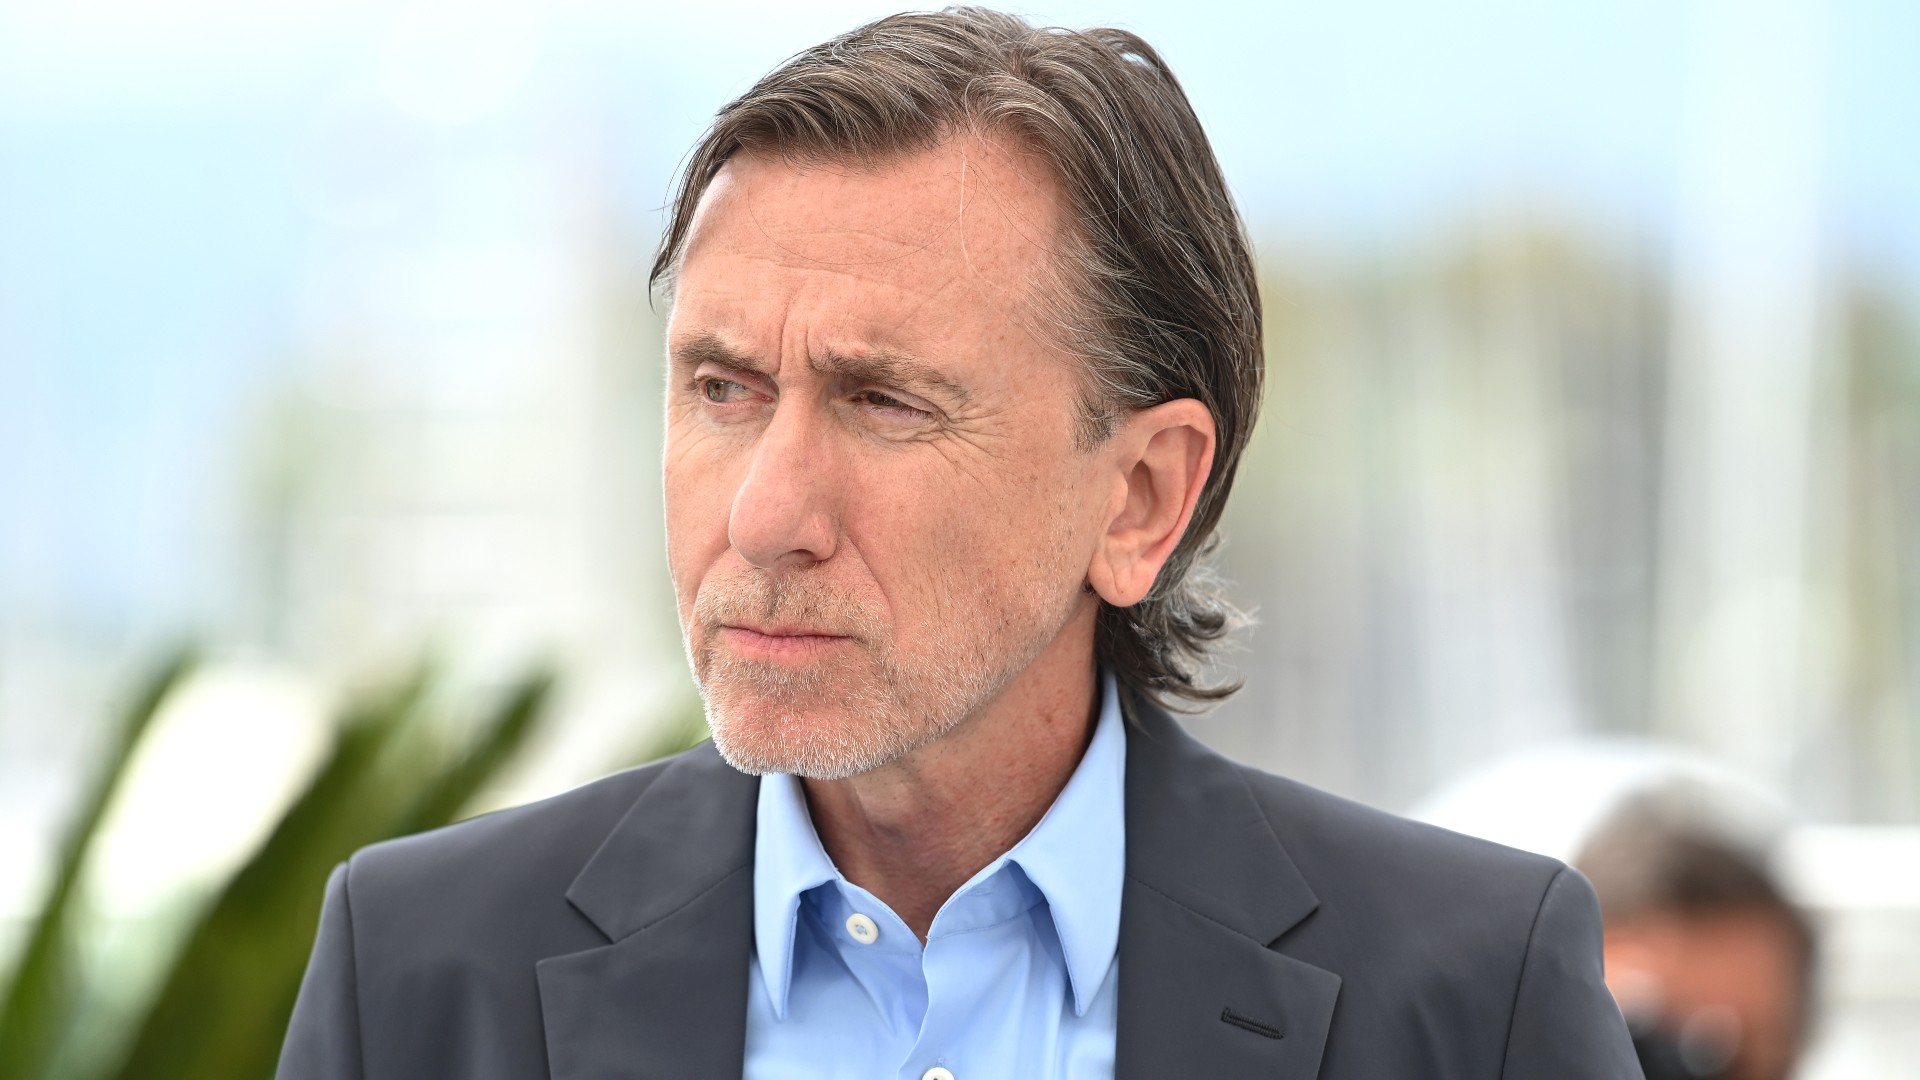 Casting News: Tim Roth Replaces Ian McShane in Australian Crime Series 'Last King of the Cross'